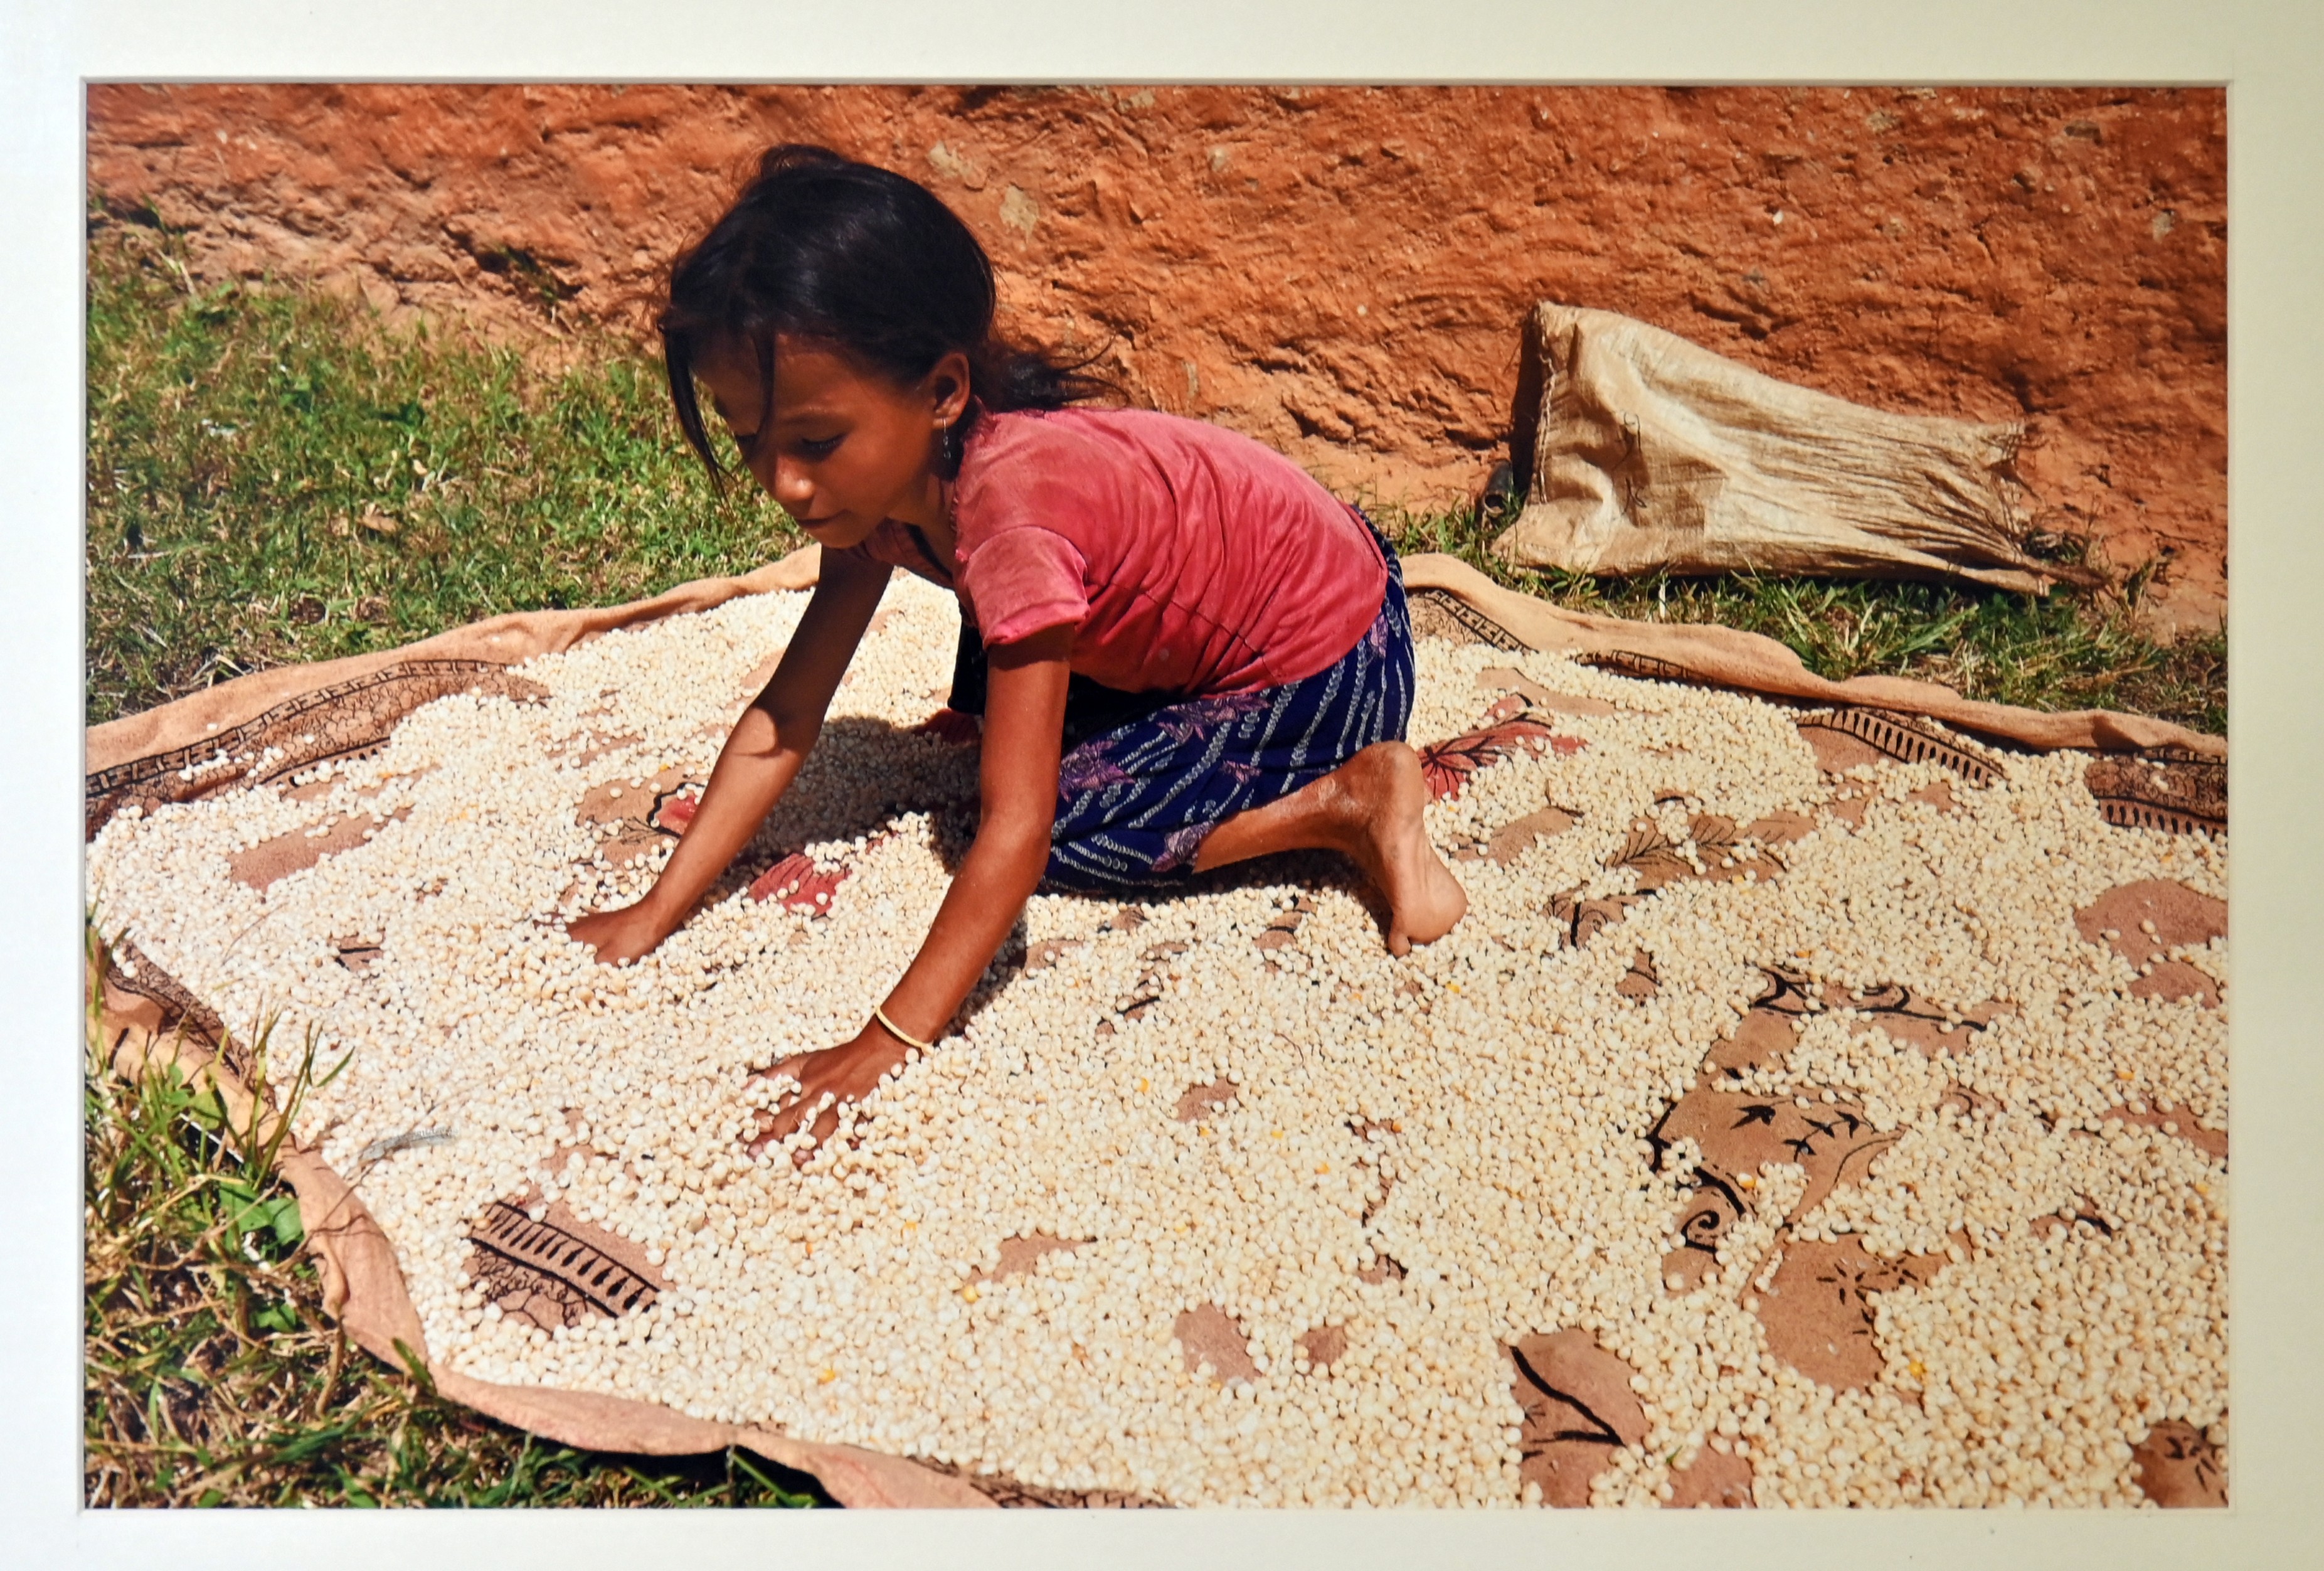 A picture of a young girl drying up the grains